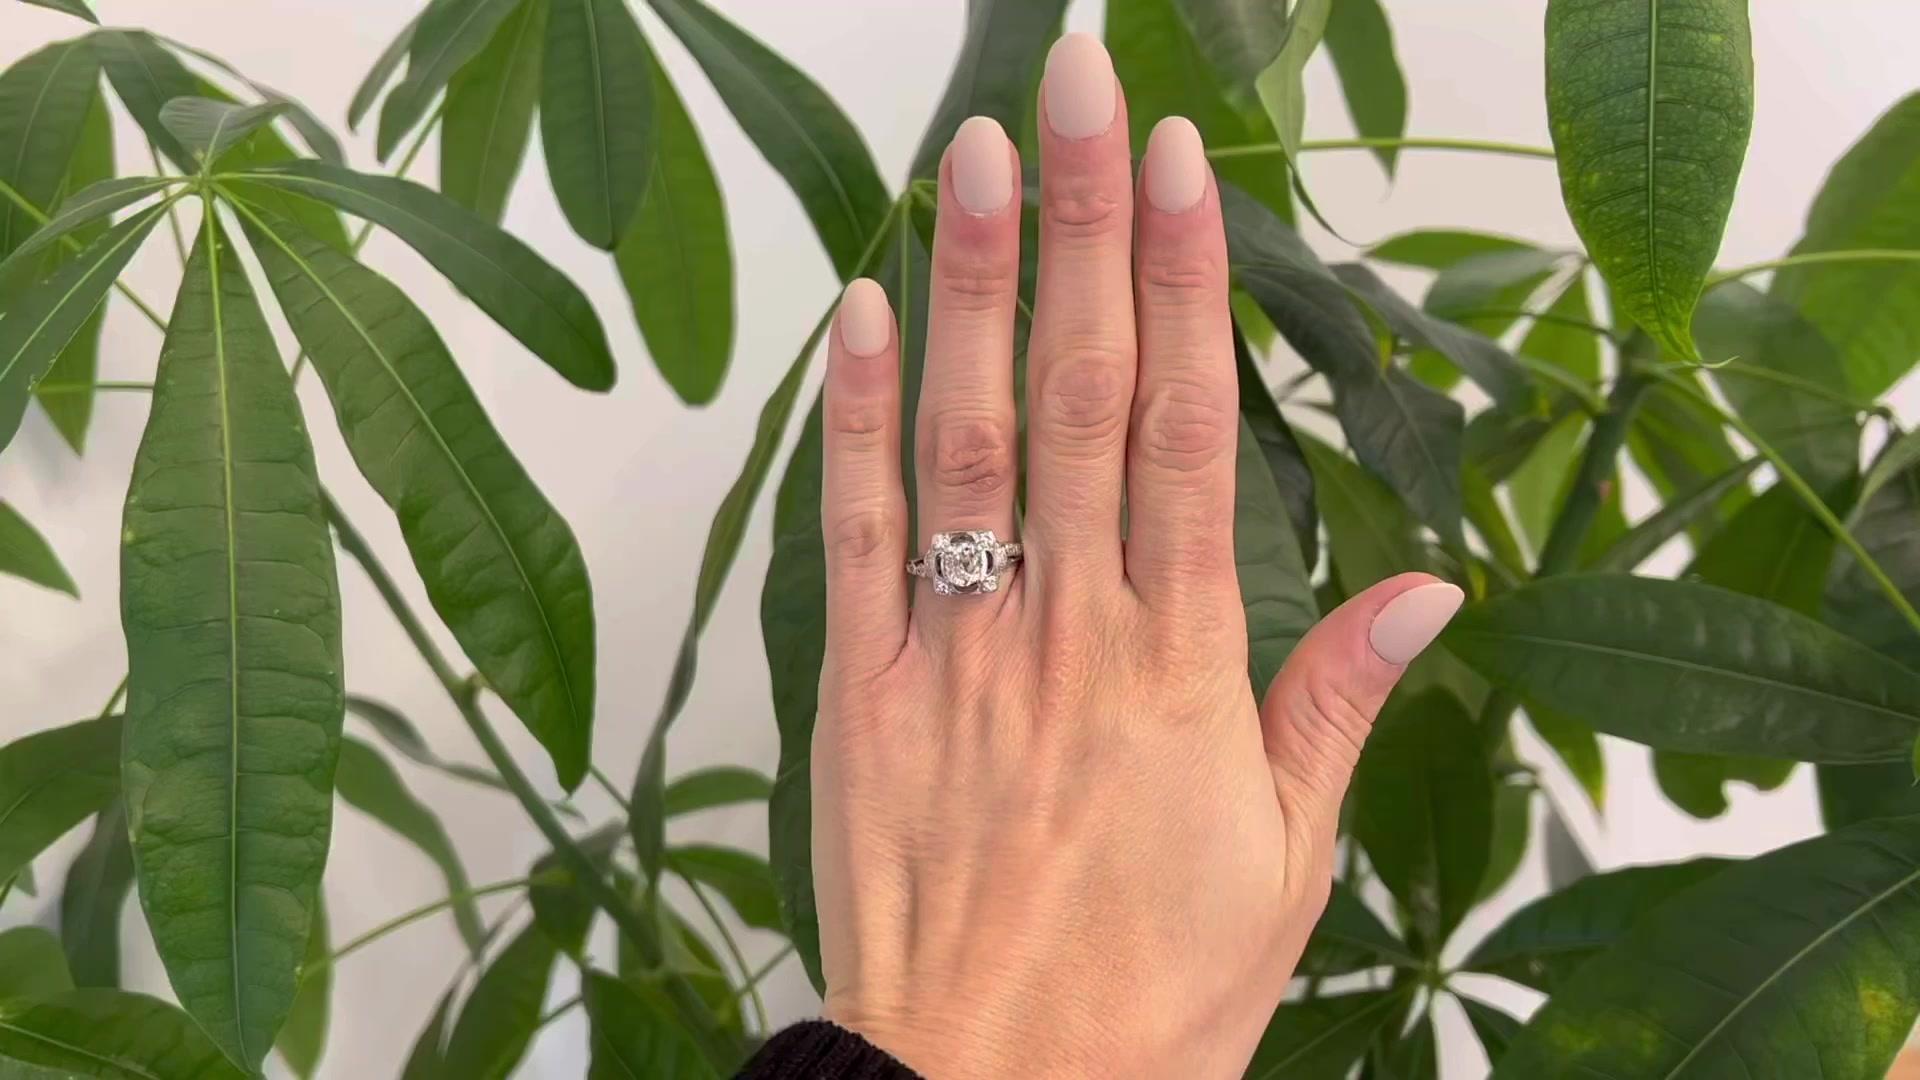 One Mid Century GIA 1.55 Carats Old Mine Cut Diamond Platinum Ring. Featuring one GIA old mine cut diamond of 1.55 carats, accompanied with GIA #2225696679 stating the diamond is L color, I1 clarity. Accented by 16 round brilliant cut and single cut